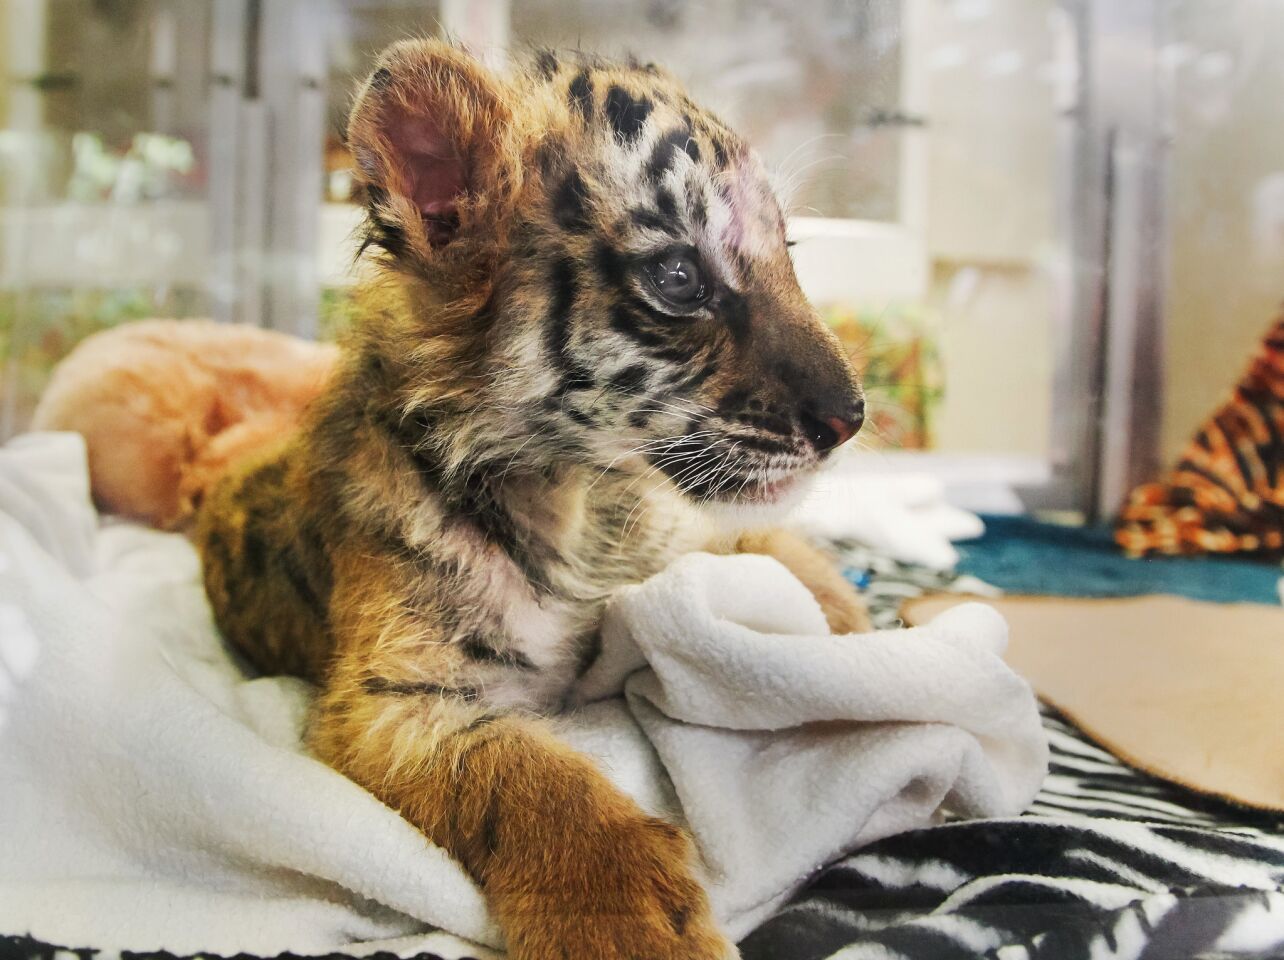 Tiger Cub Confiscated at Border